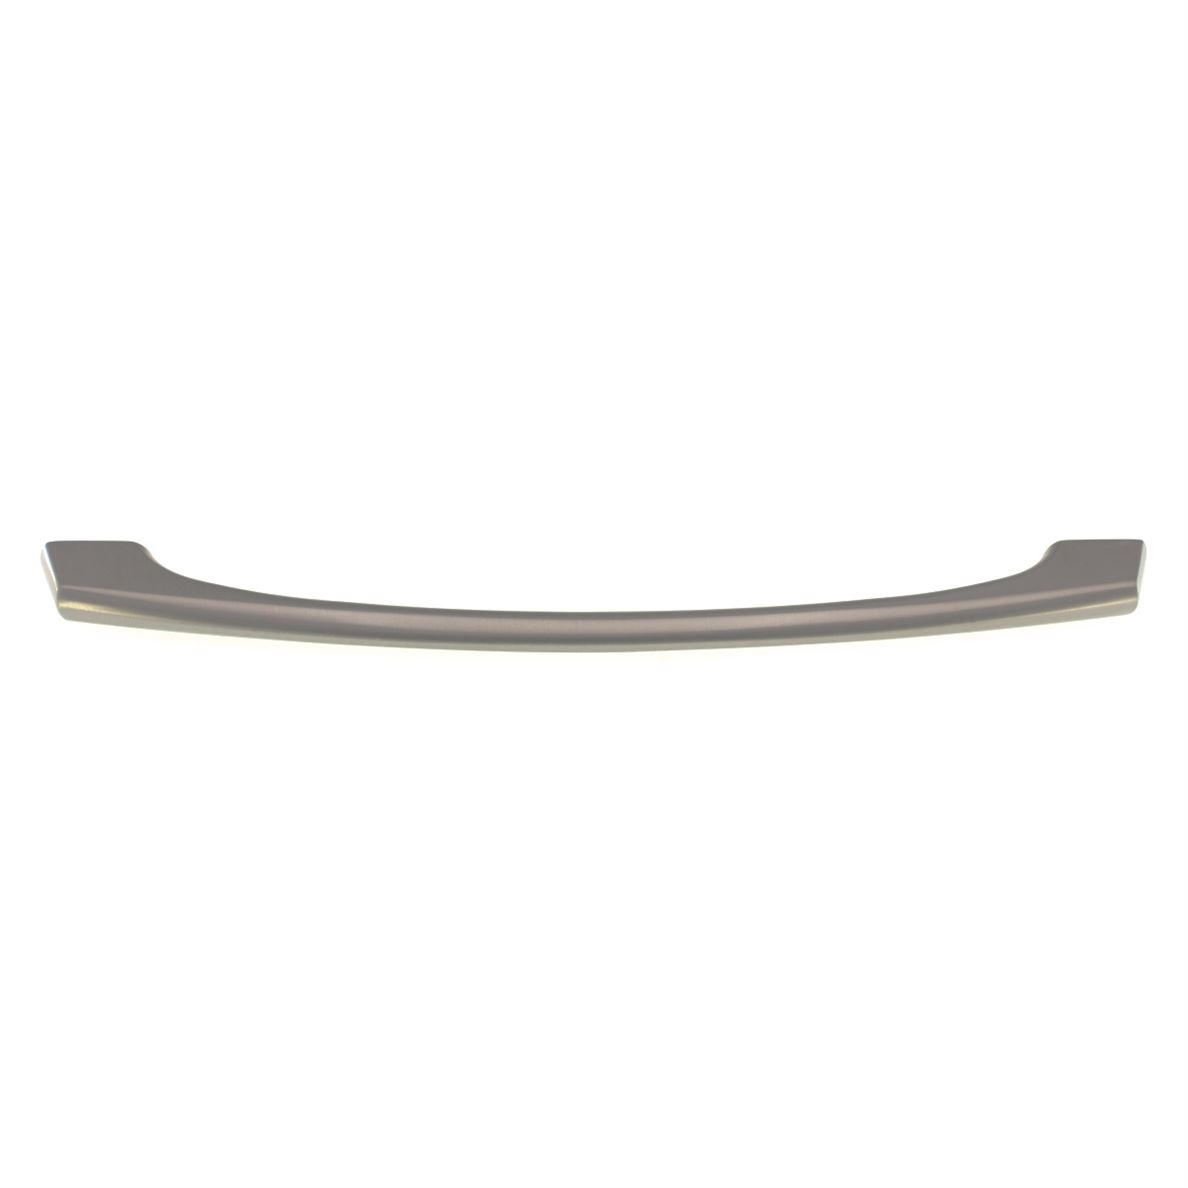 Hickory Hardware Greenwich Satin Nickel 8.82" (224mm) Ctr. Cabinet Pull P3041-SS